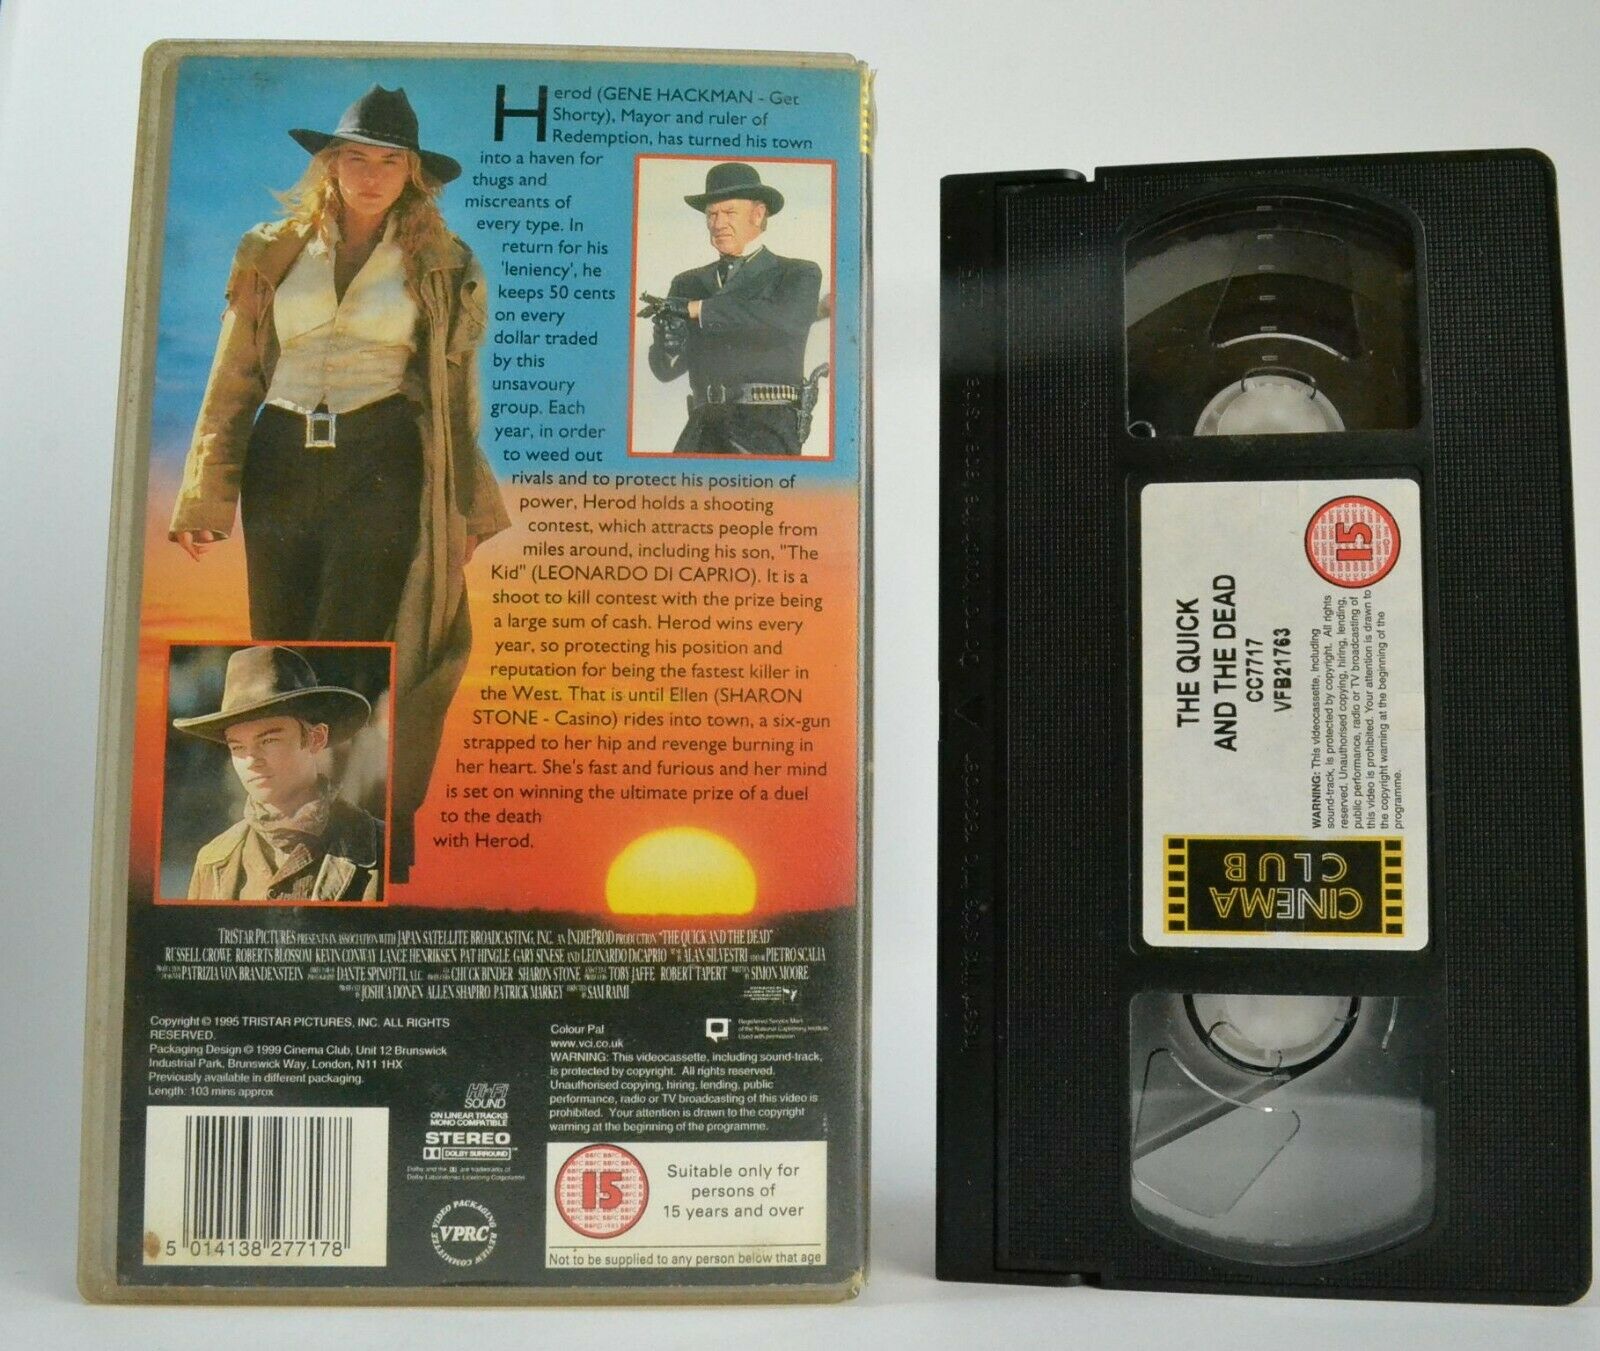 The Quick And The Dead (1995): Sam Raimi - Western - S.Stone/G.Hackman - VHS